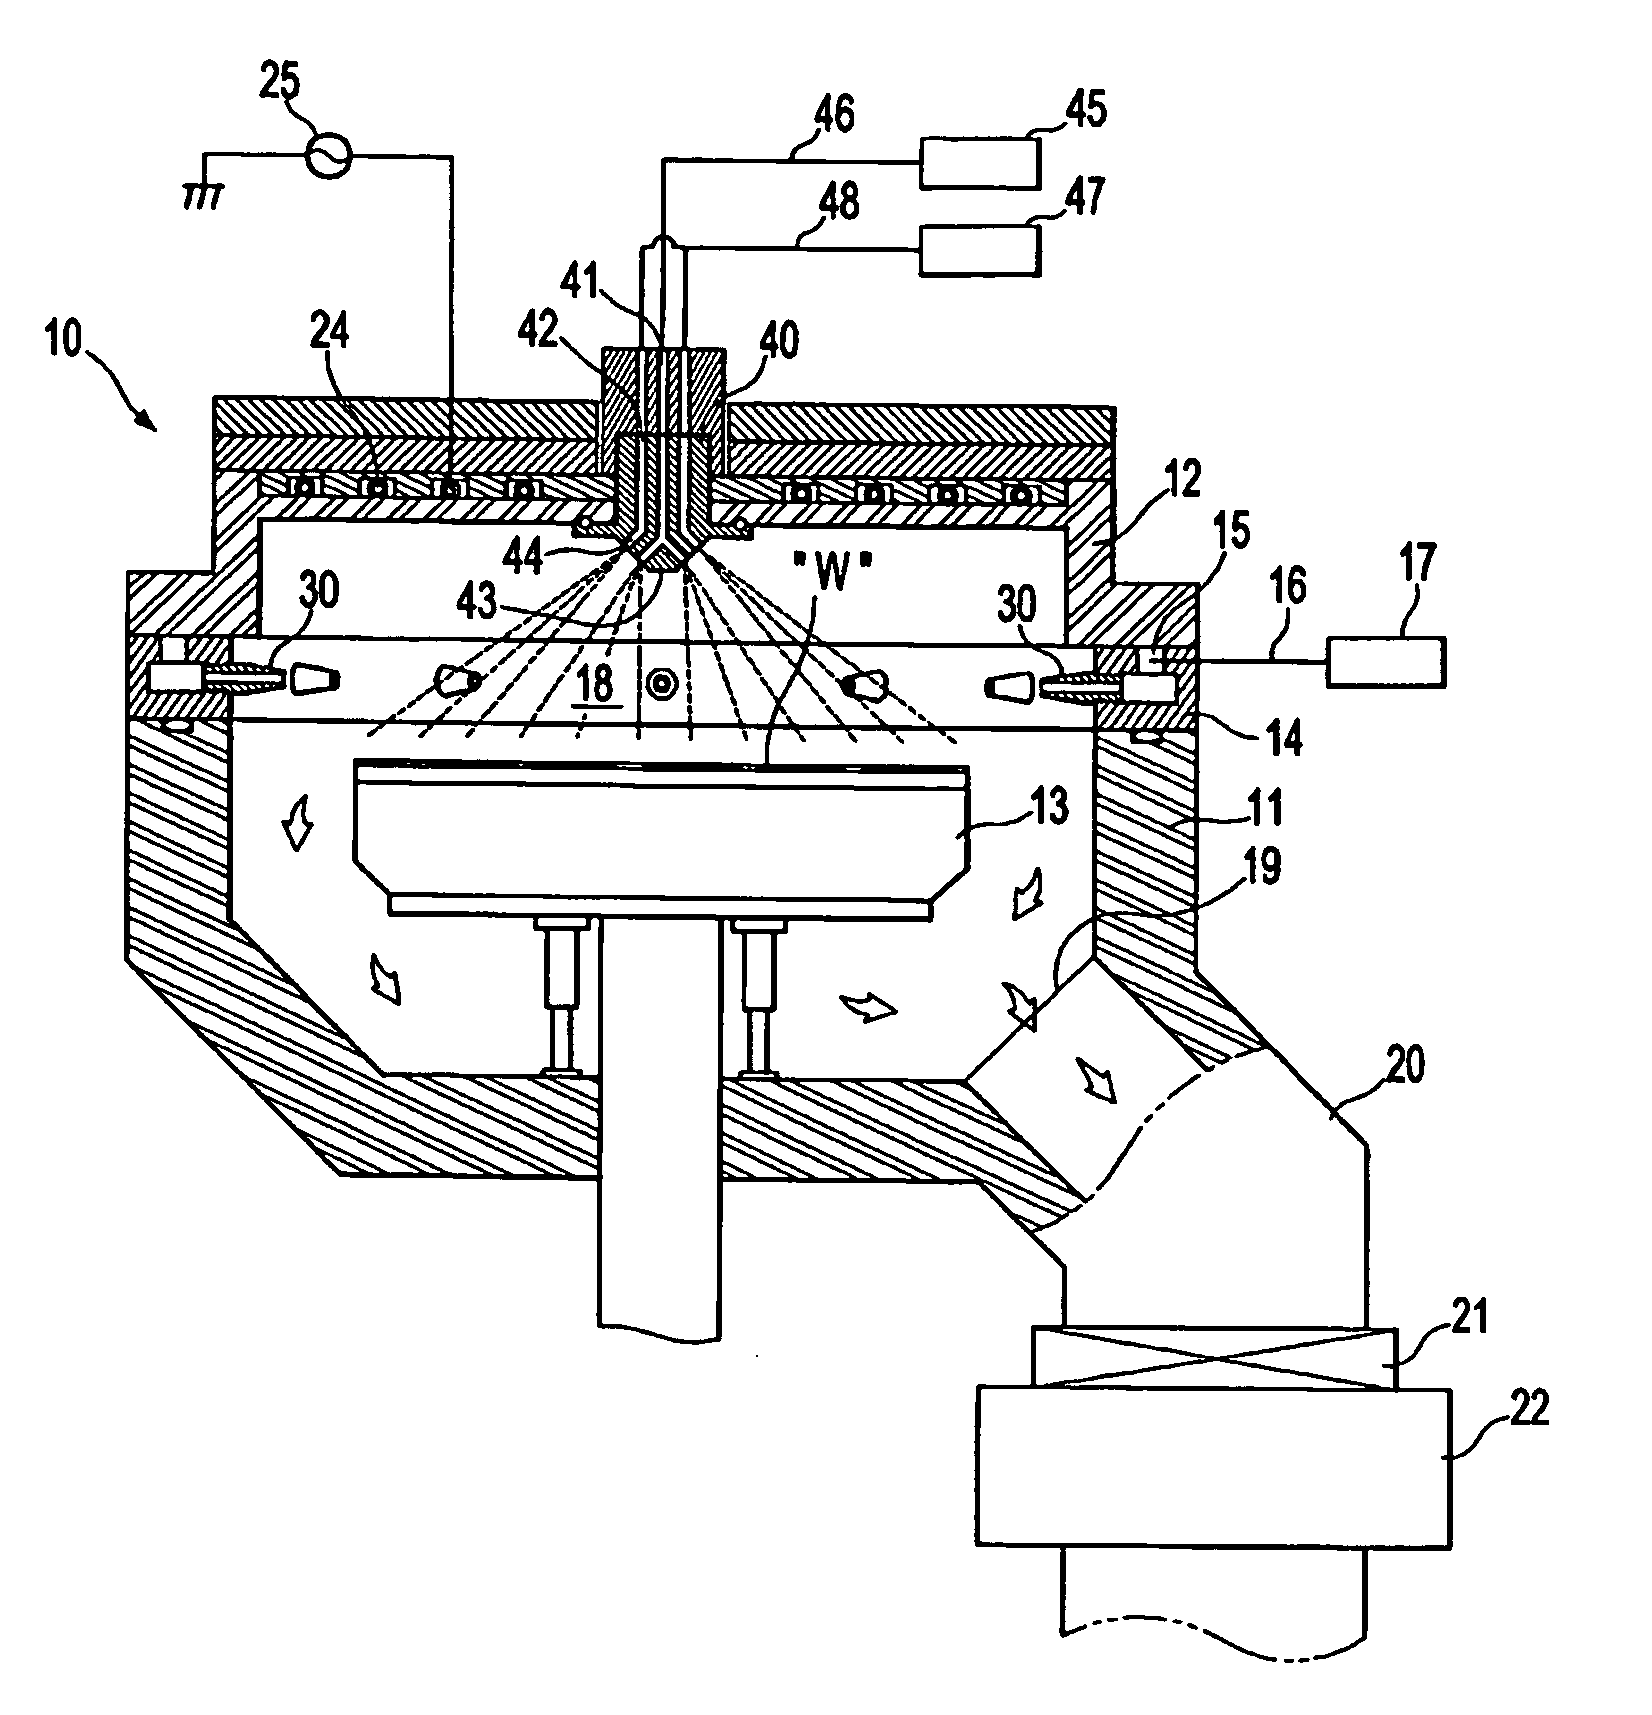 Apparatus to manufacture semiconductor